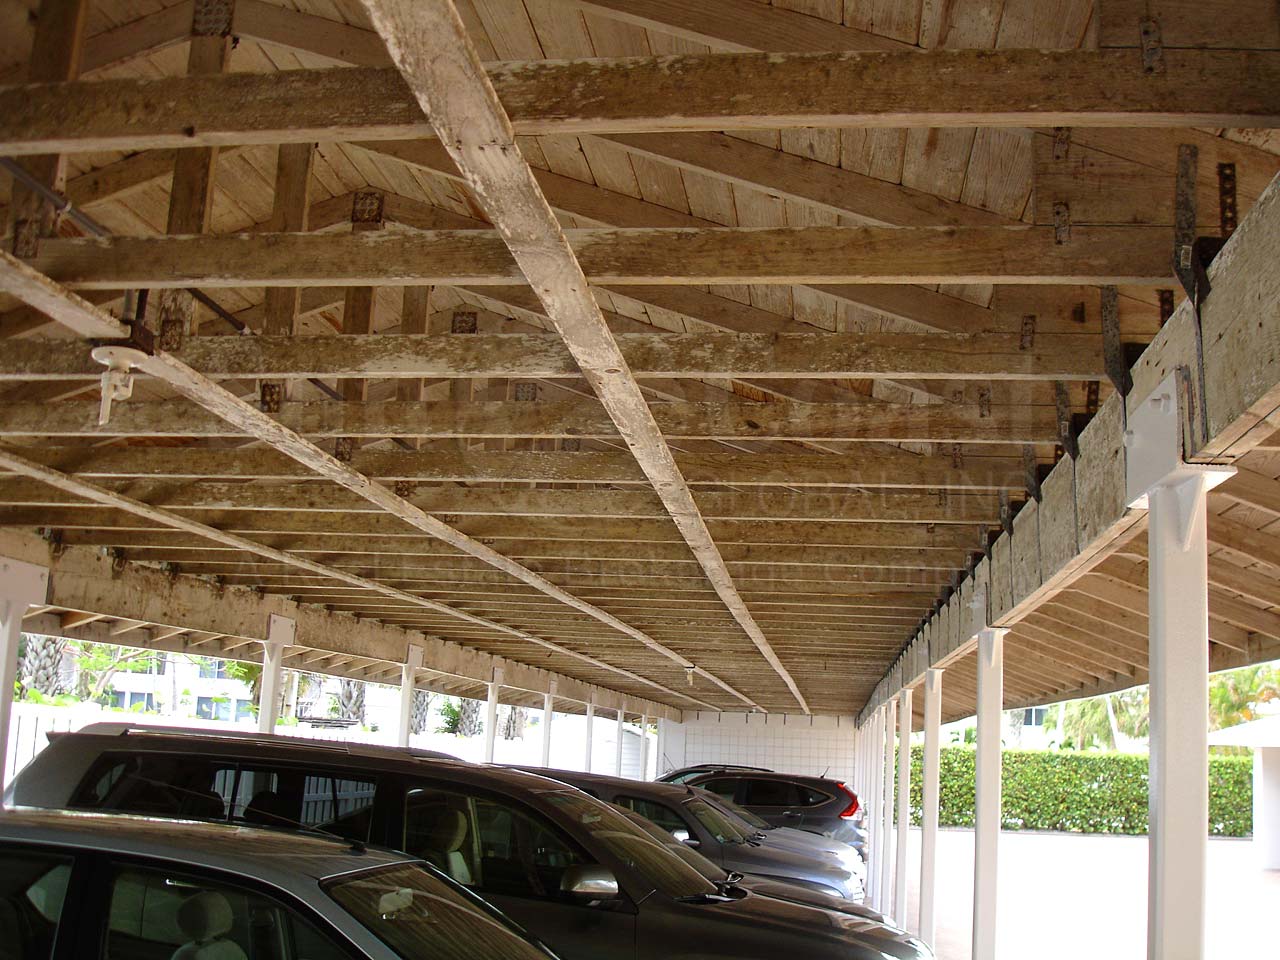 Carriage Club Covered Parking Roof